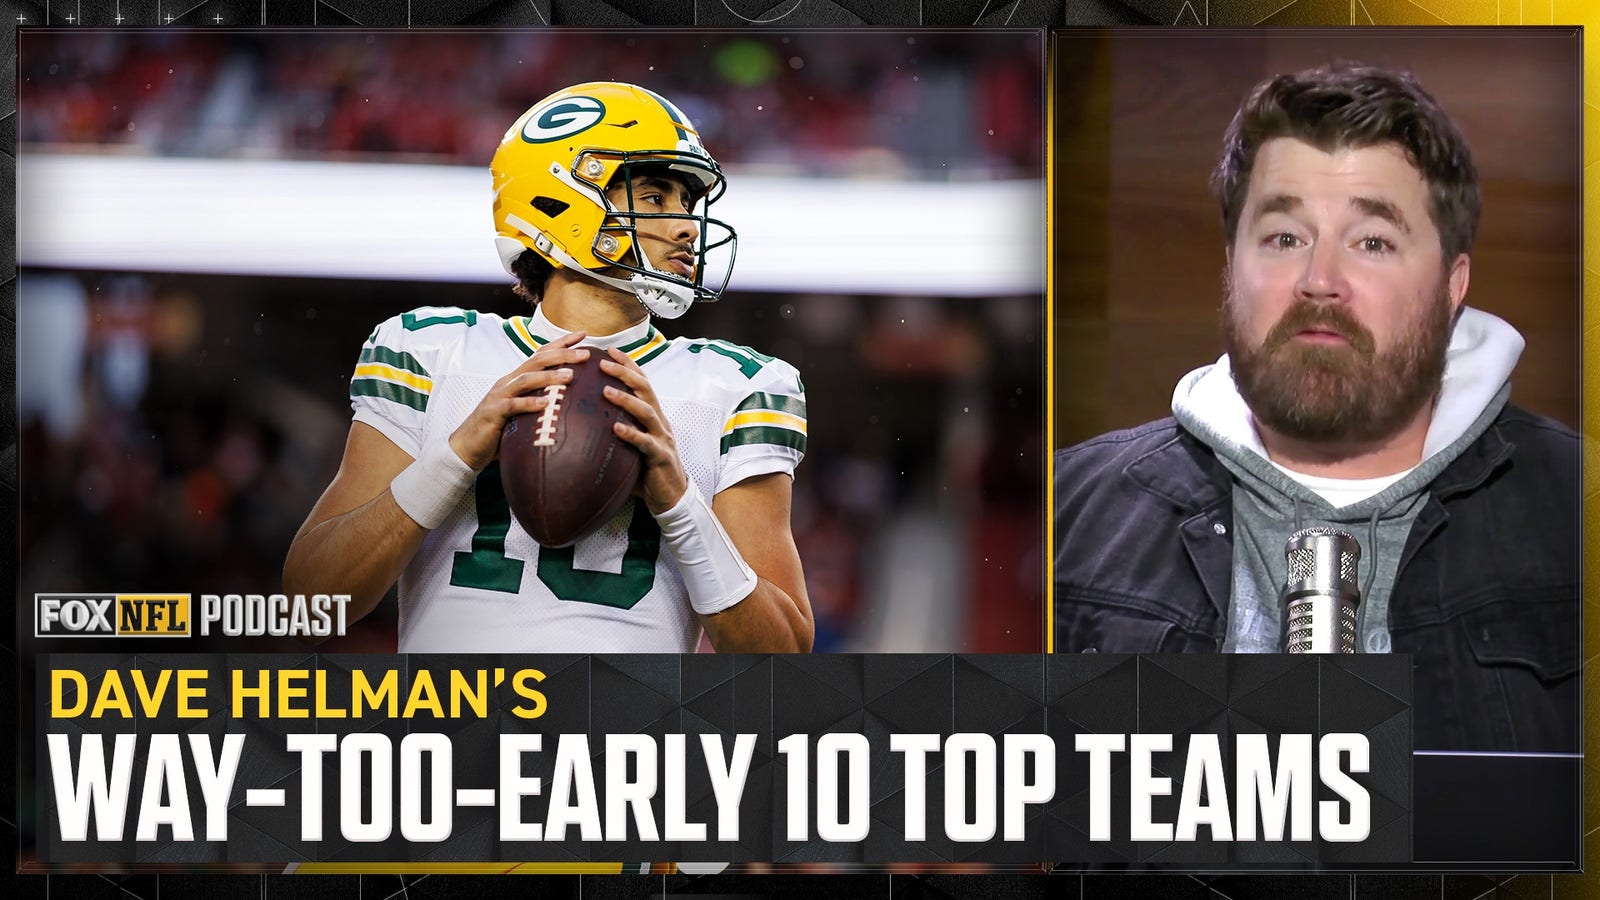 Packers, Lions & Chiefs ft. in way-too-early top 10 teams after Super Bowl LVIII 